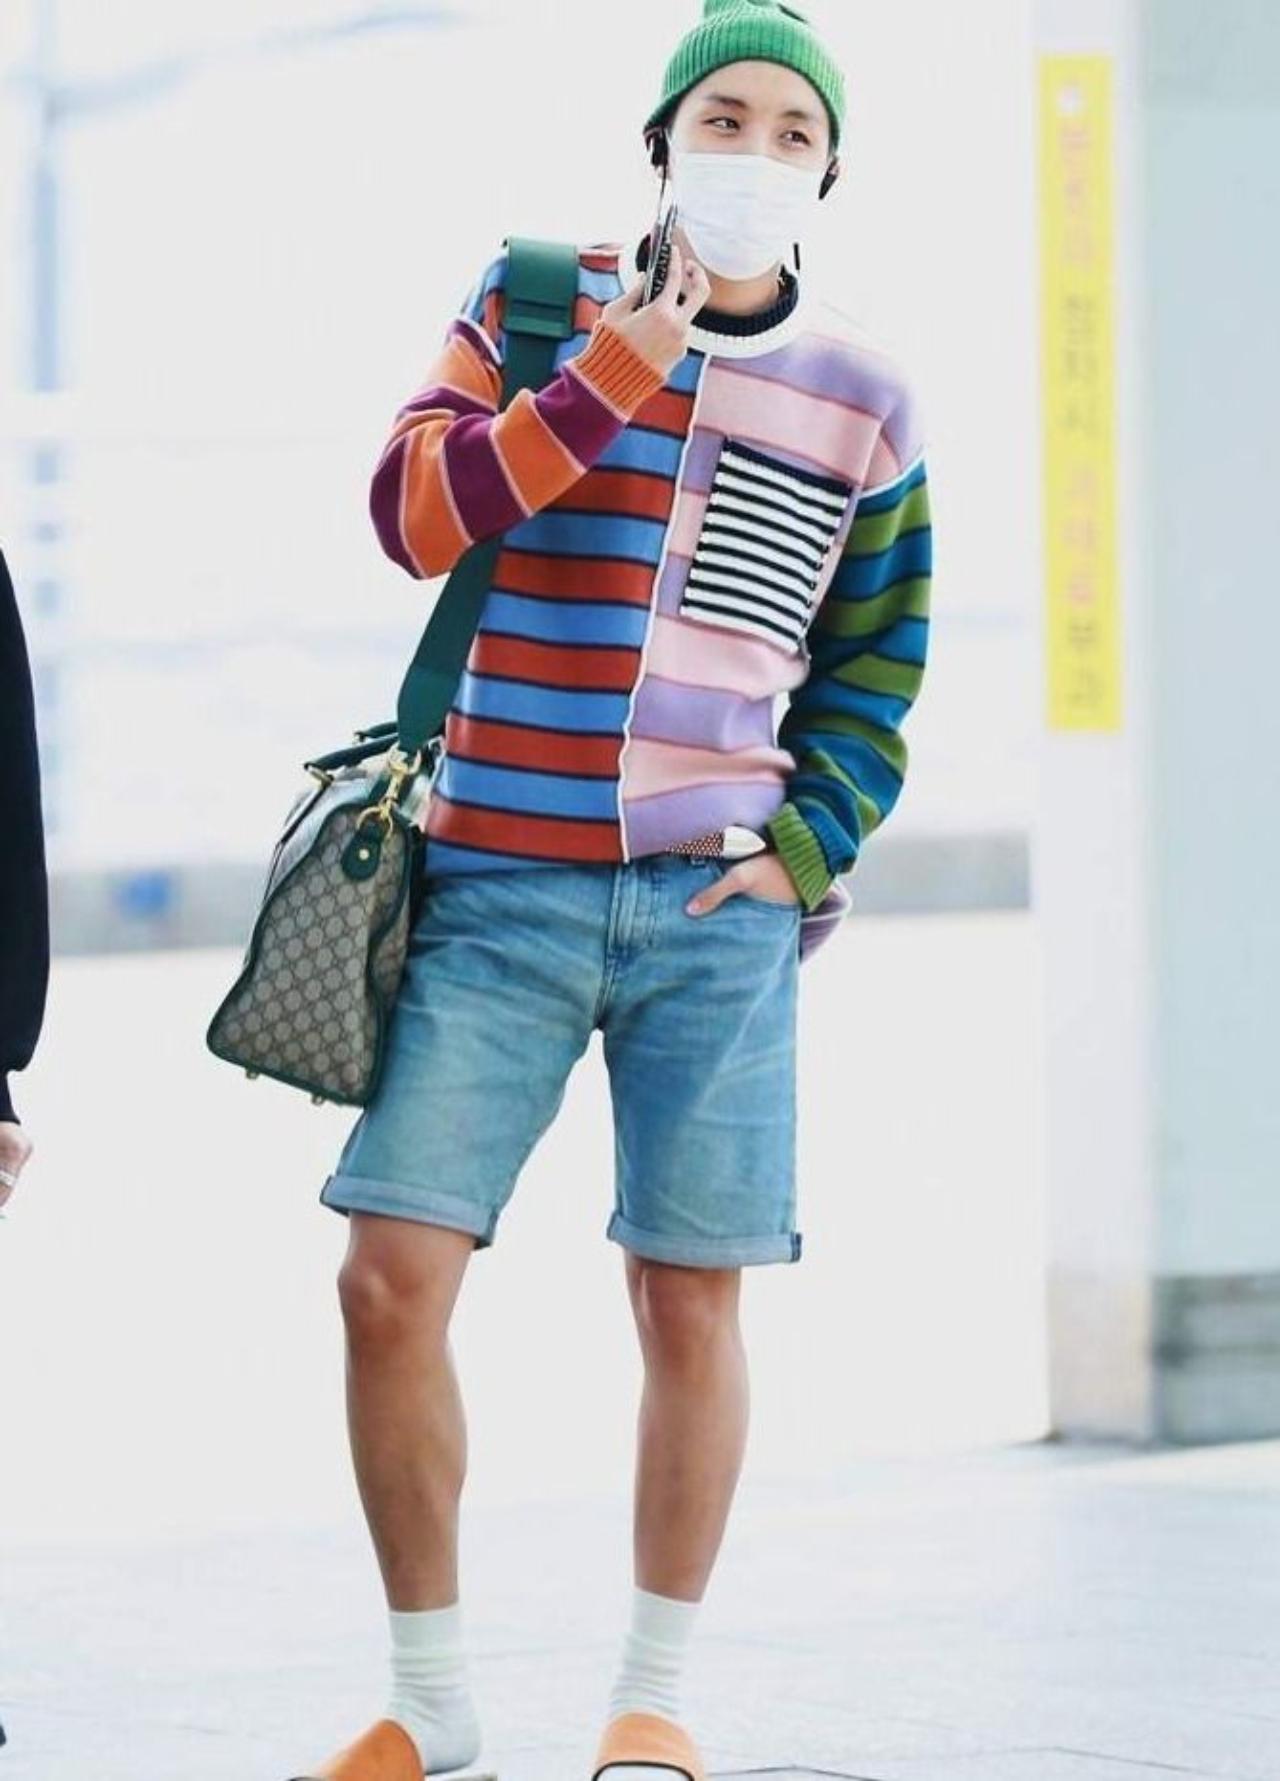 Best of BTS J-Hope's casual style